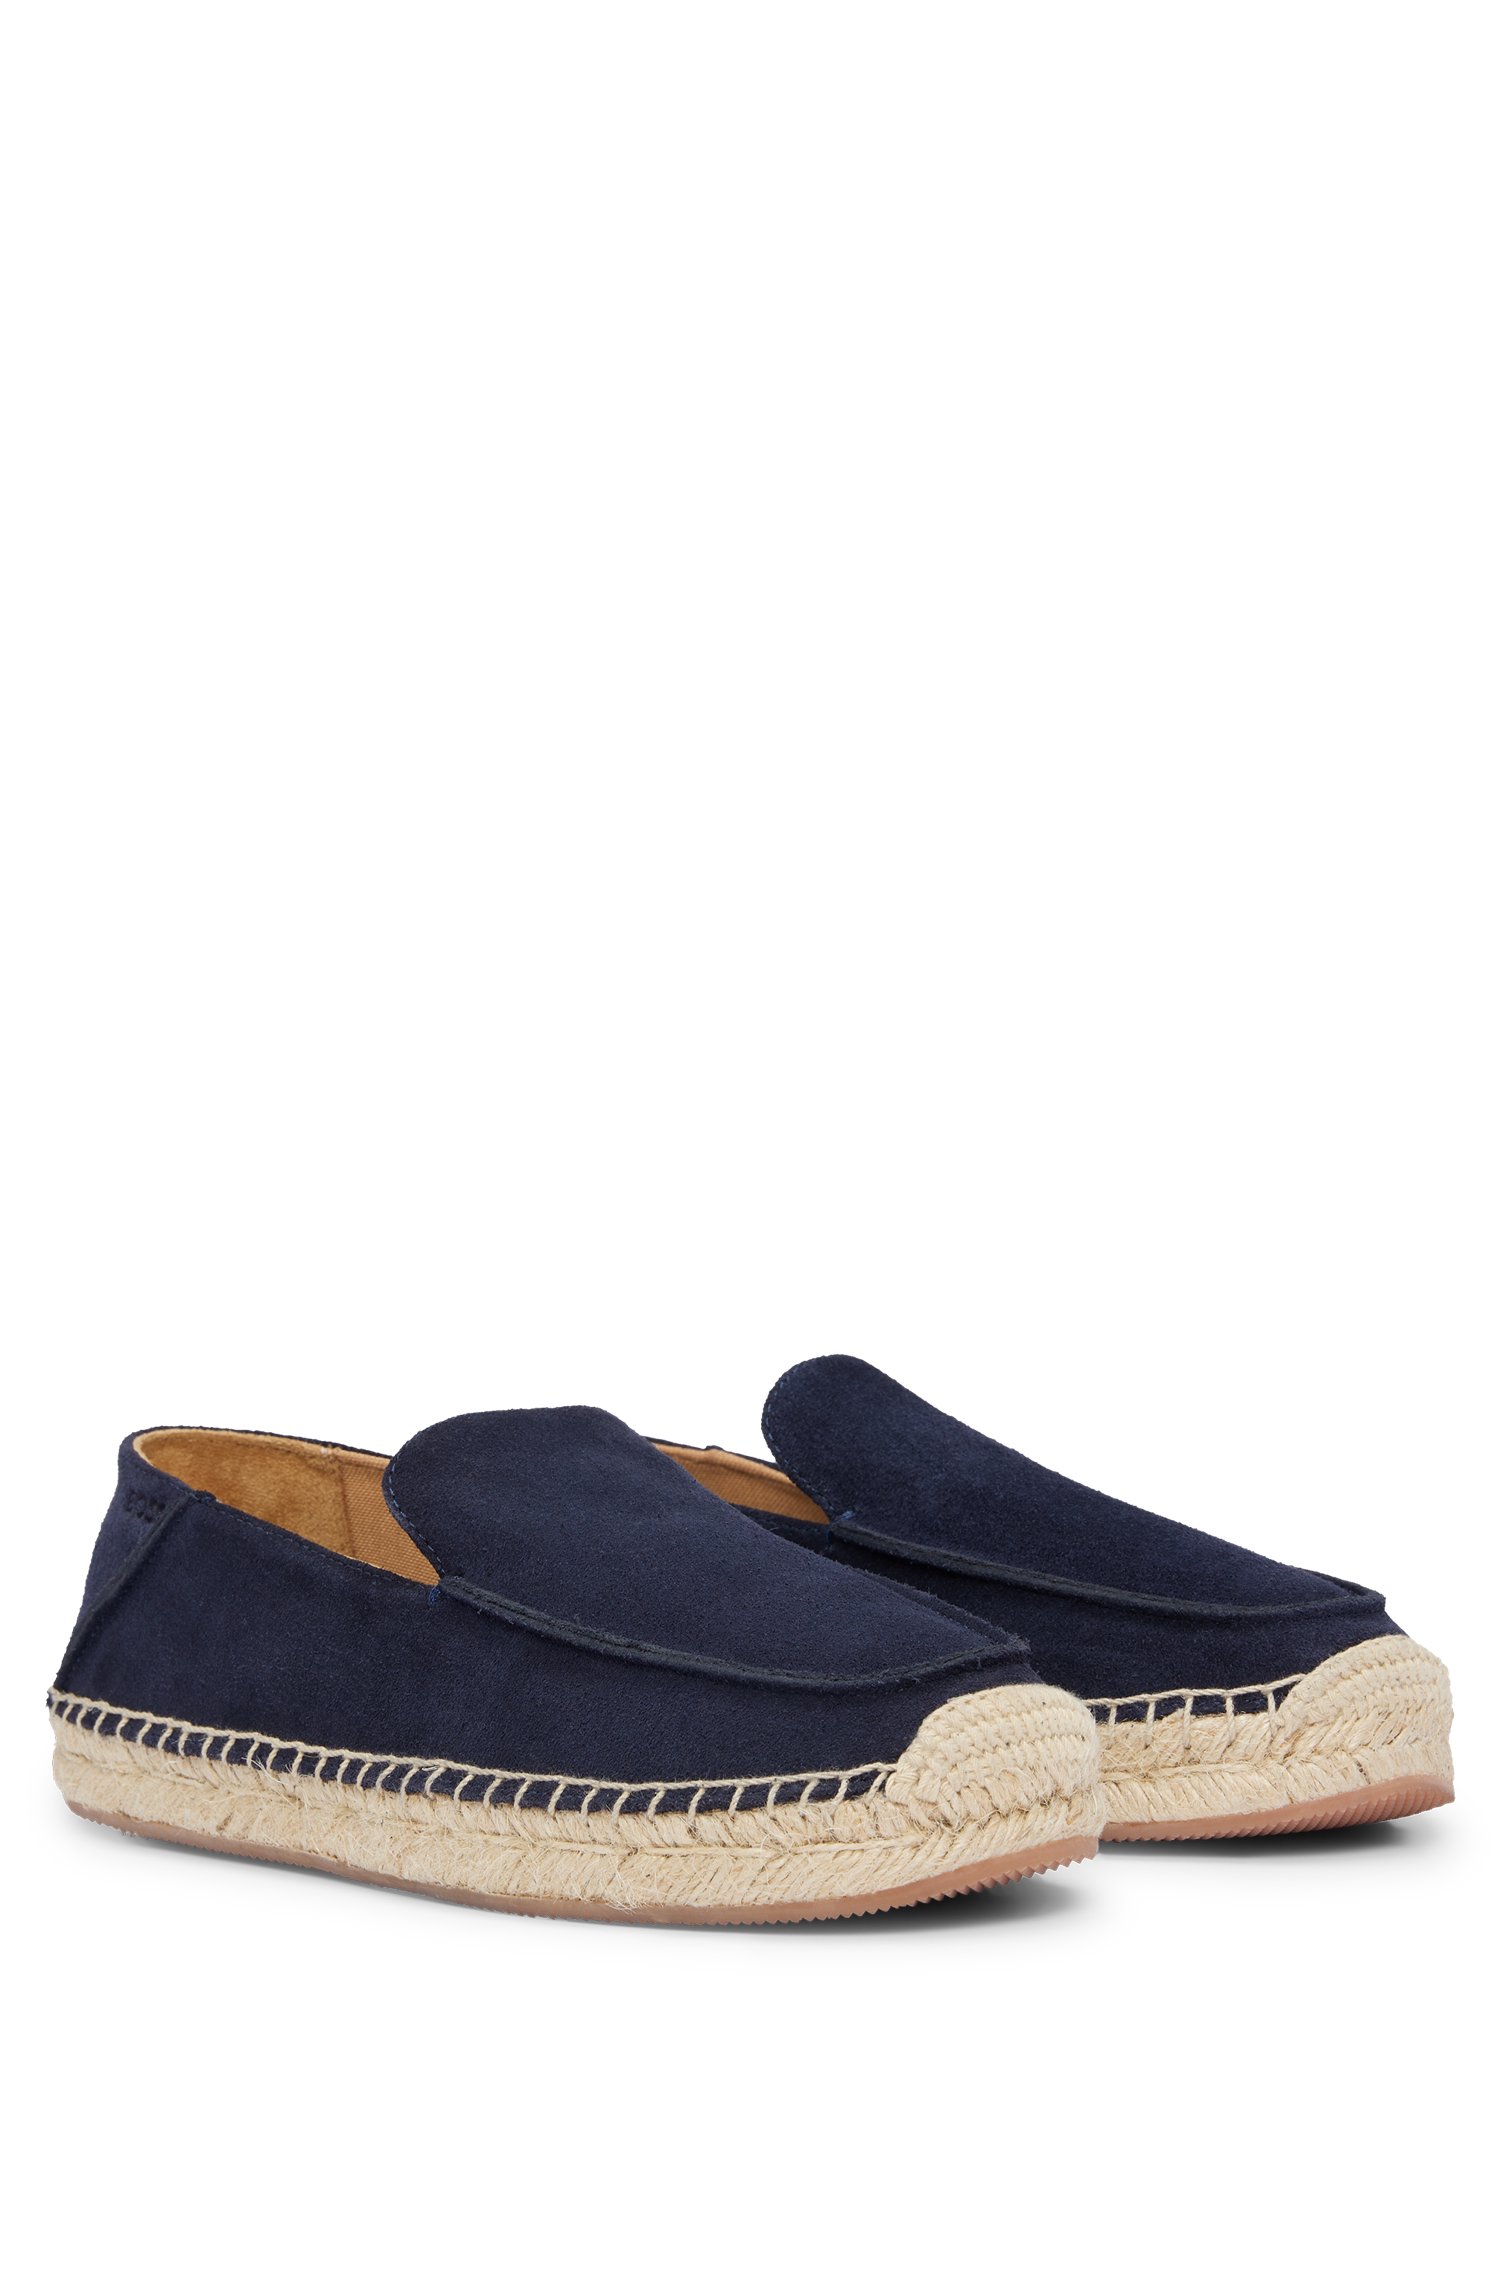 Suede slip-on espadrilles with jute sole